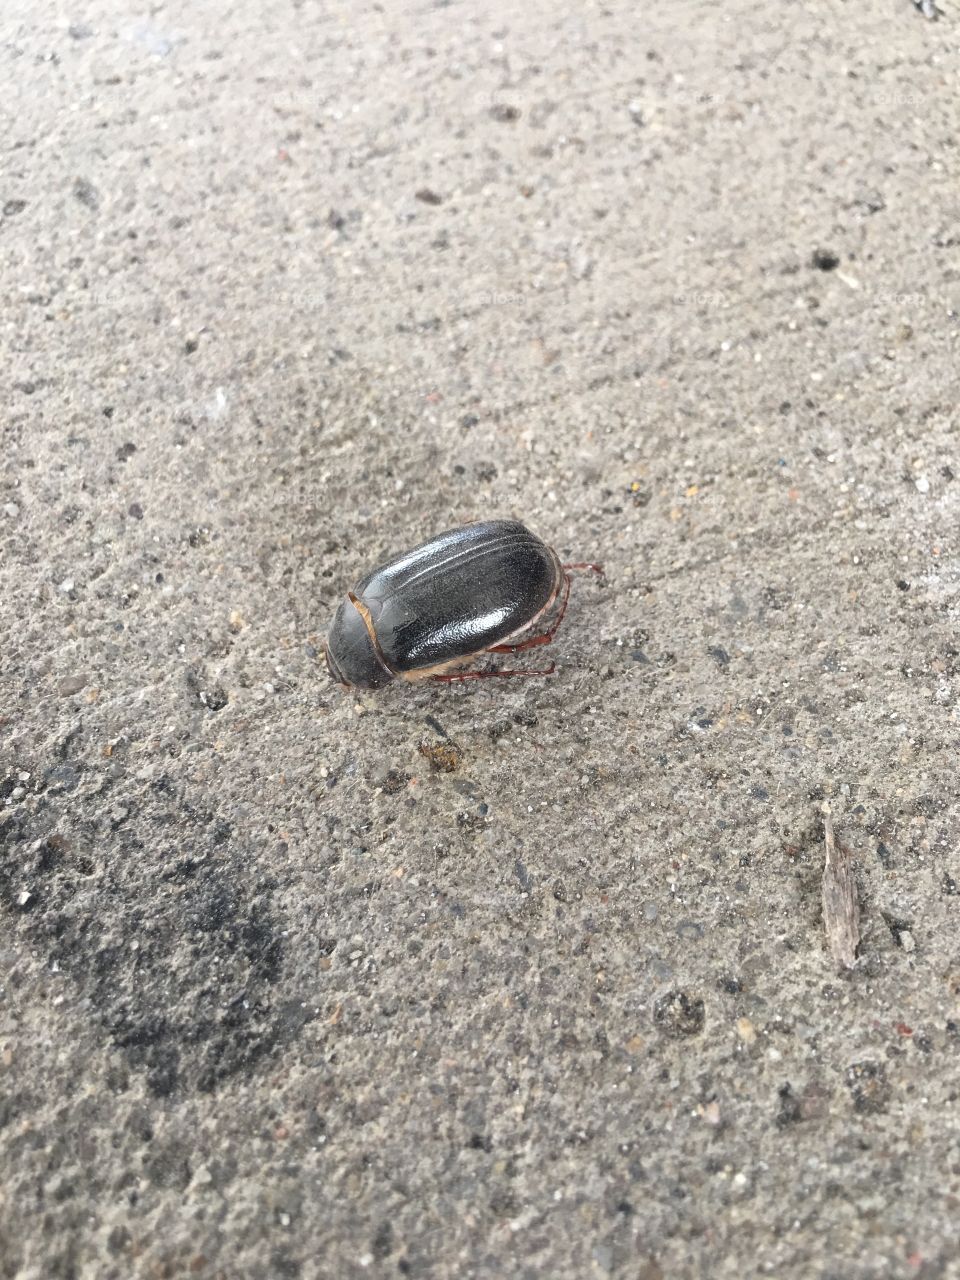 Large June bug. Southpointe, PA.